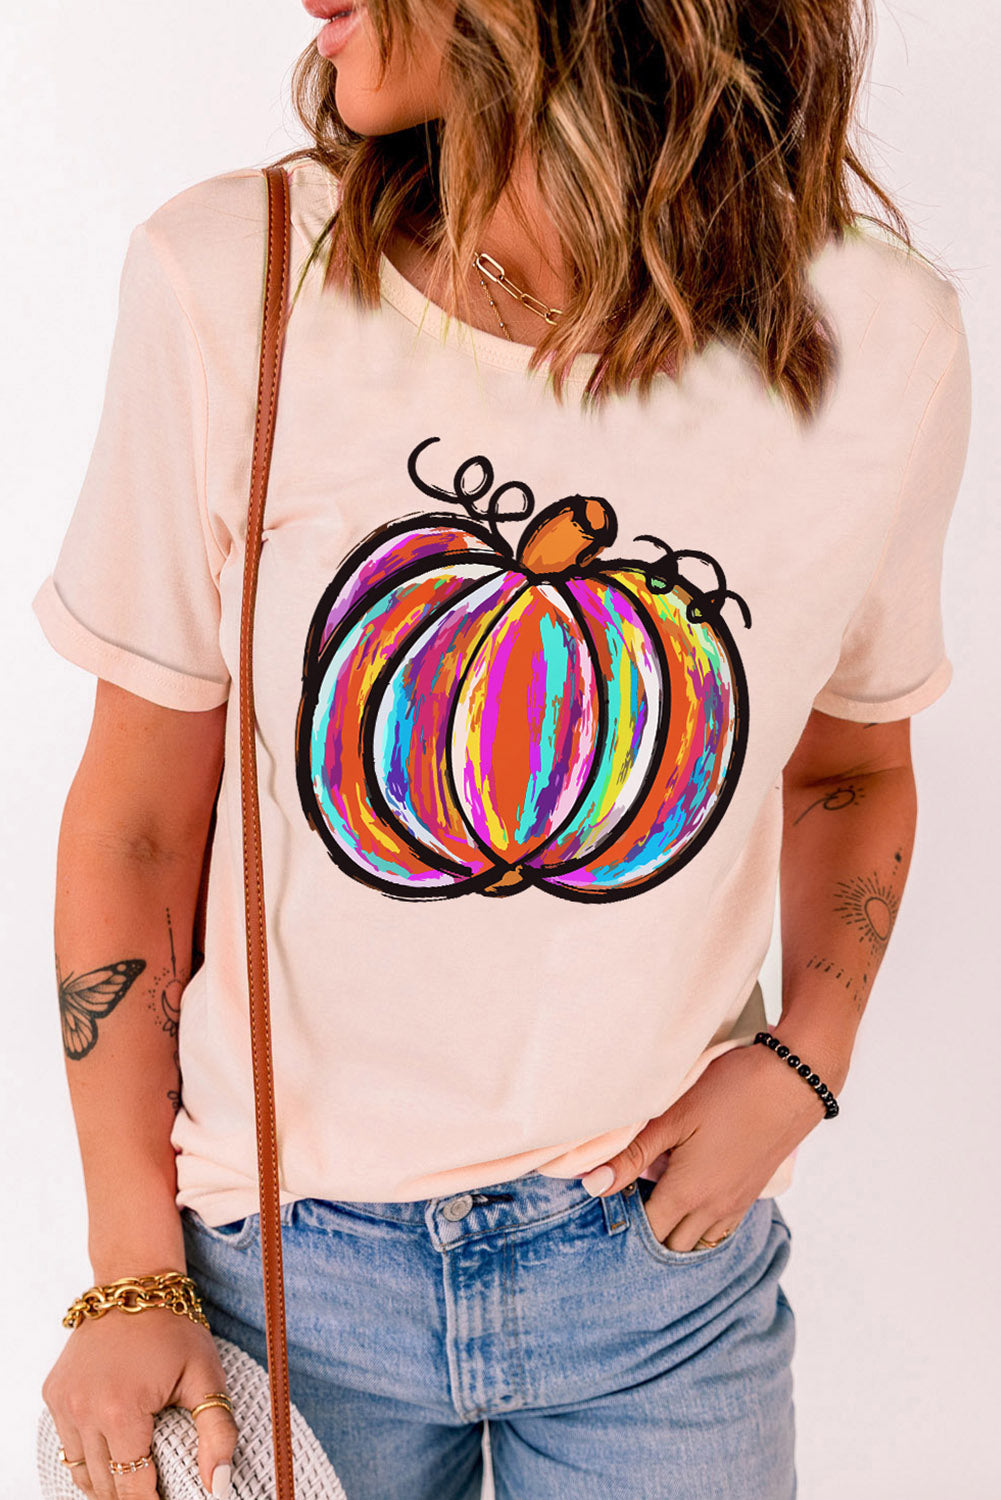 🎃 Get in the Fall Spirit with This Pumpkin Graphic Round Neck T-Shirt! 🍂 Perfect Autumn Apparel for a Stylish and Comfy Look! ShopOnlyDeal